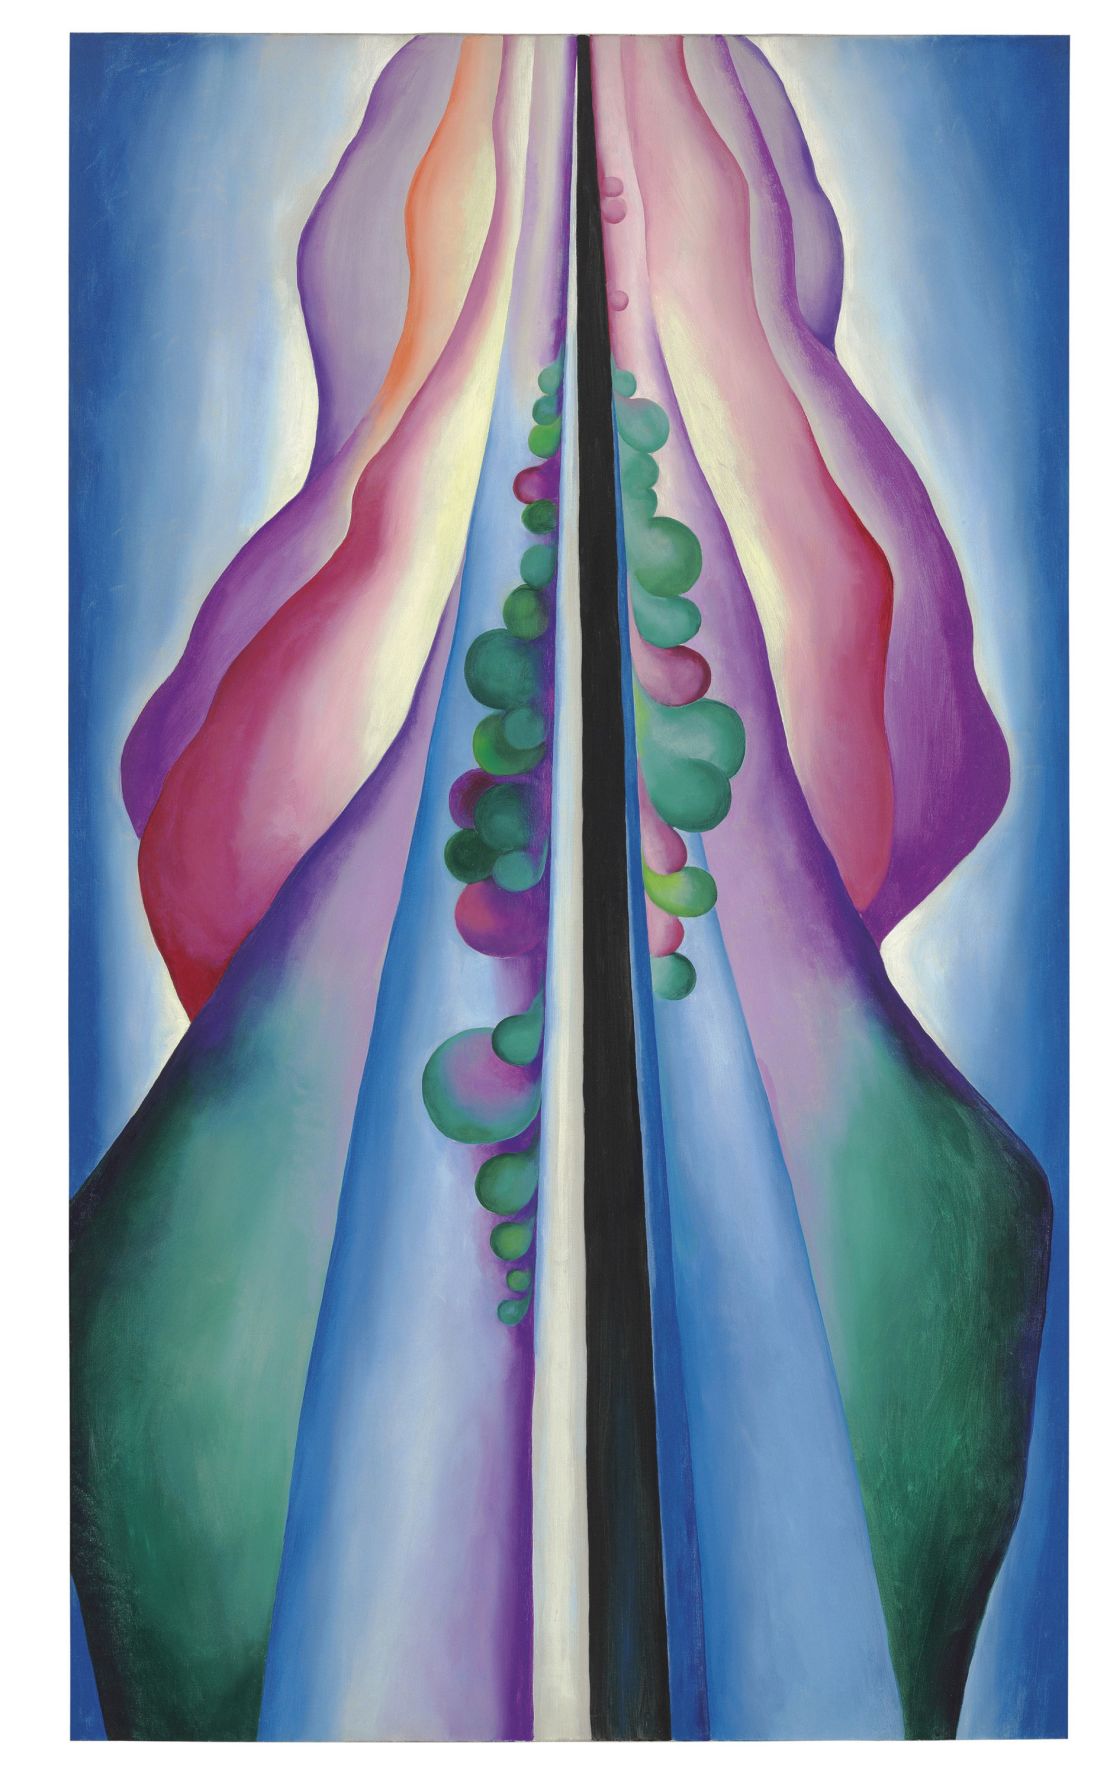 "Lake George Reflection" (ca. 1921-1922) by Georgia O'Keeffe sold for $12.9 million at a New York City auction on Thursday, May 19, 2016. 